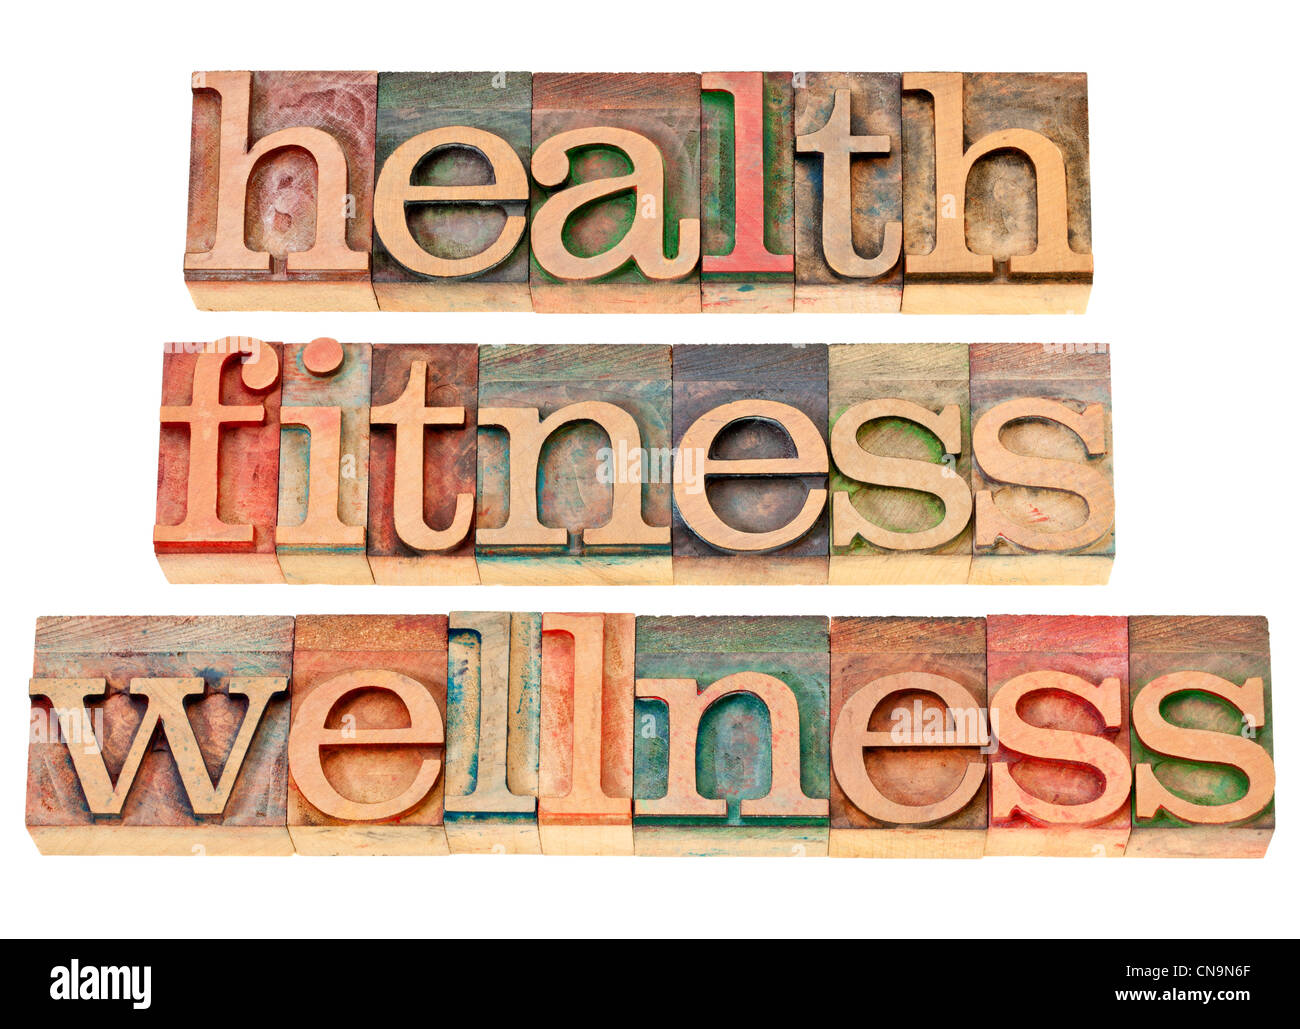 health, fitness, wellness - healthy lifestyle concept - isolated text in  vintage letterpress wood type Stock Photo - Alamy